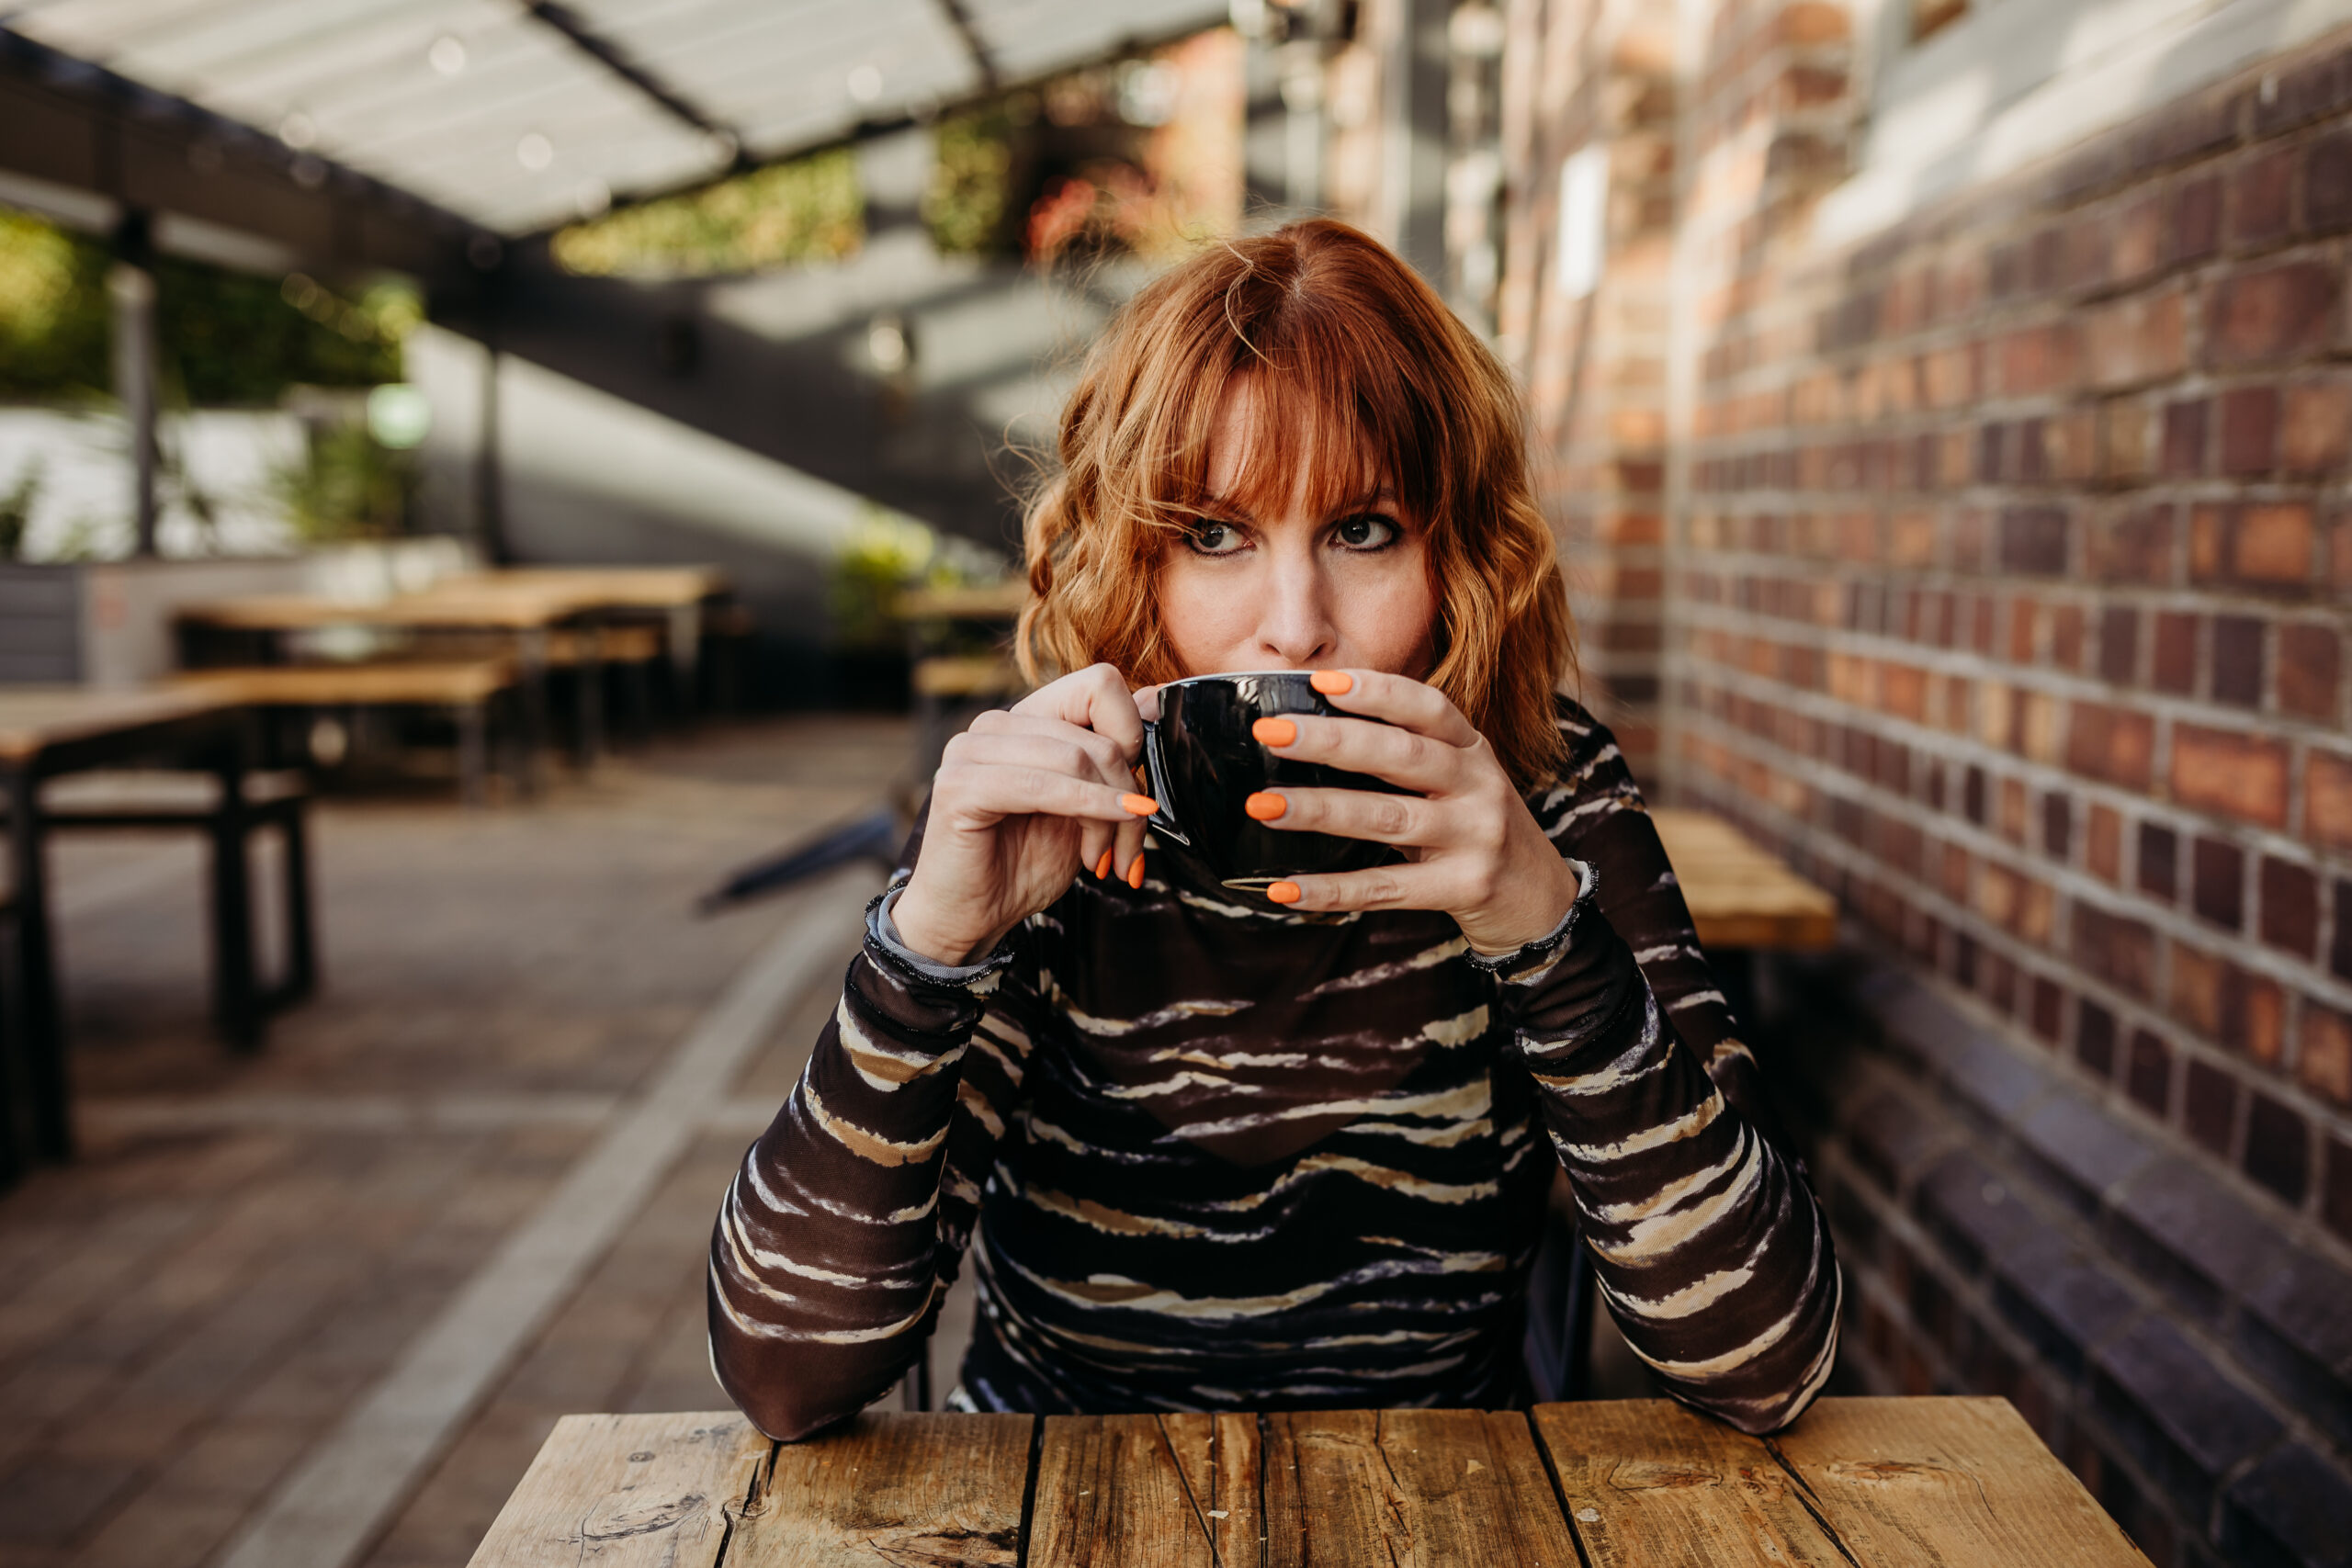 White woman with wavy ginger hair, an animal print dress and orange nails looks off to the side, playfully, while holding a coffee cup in front of her mouth